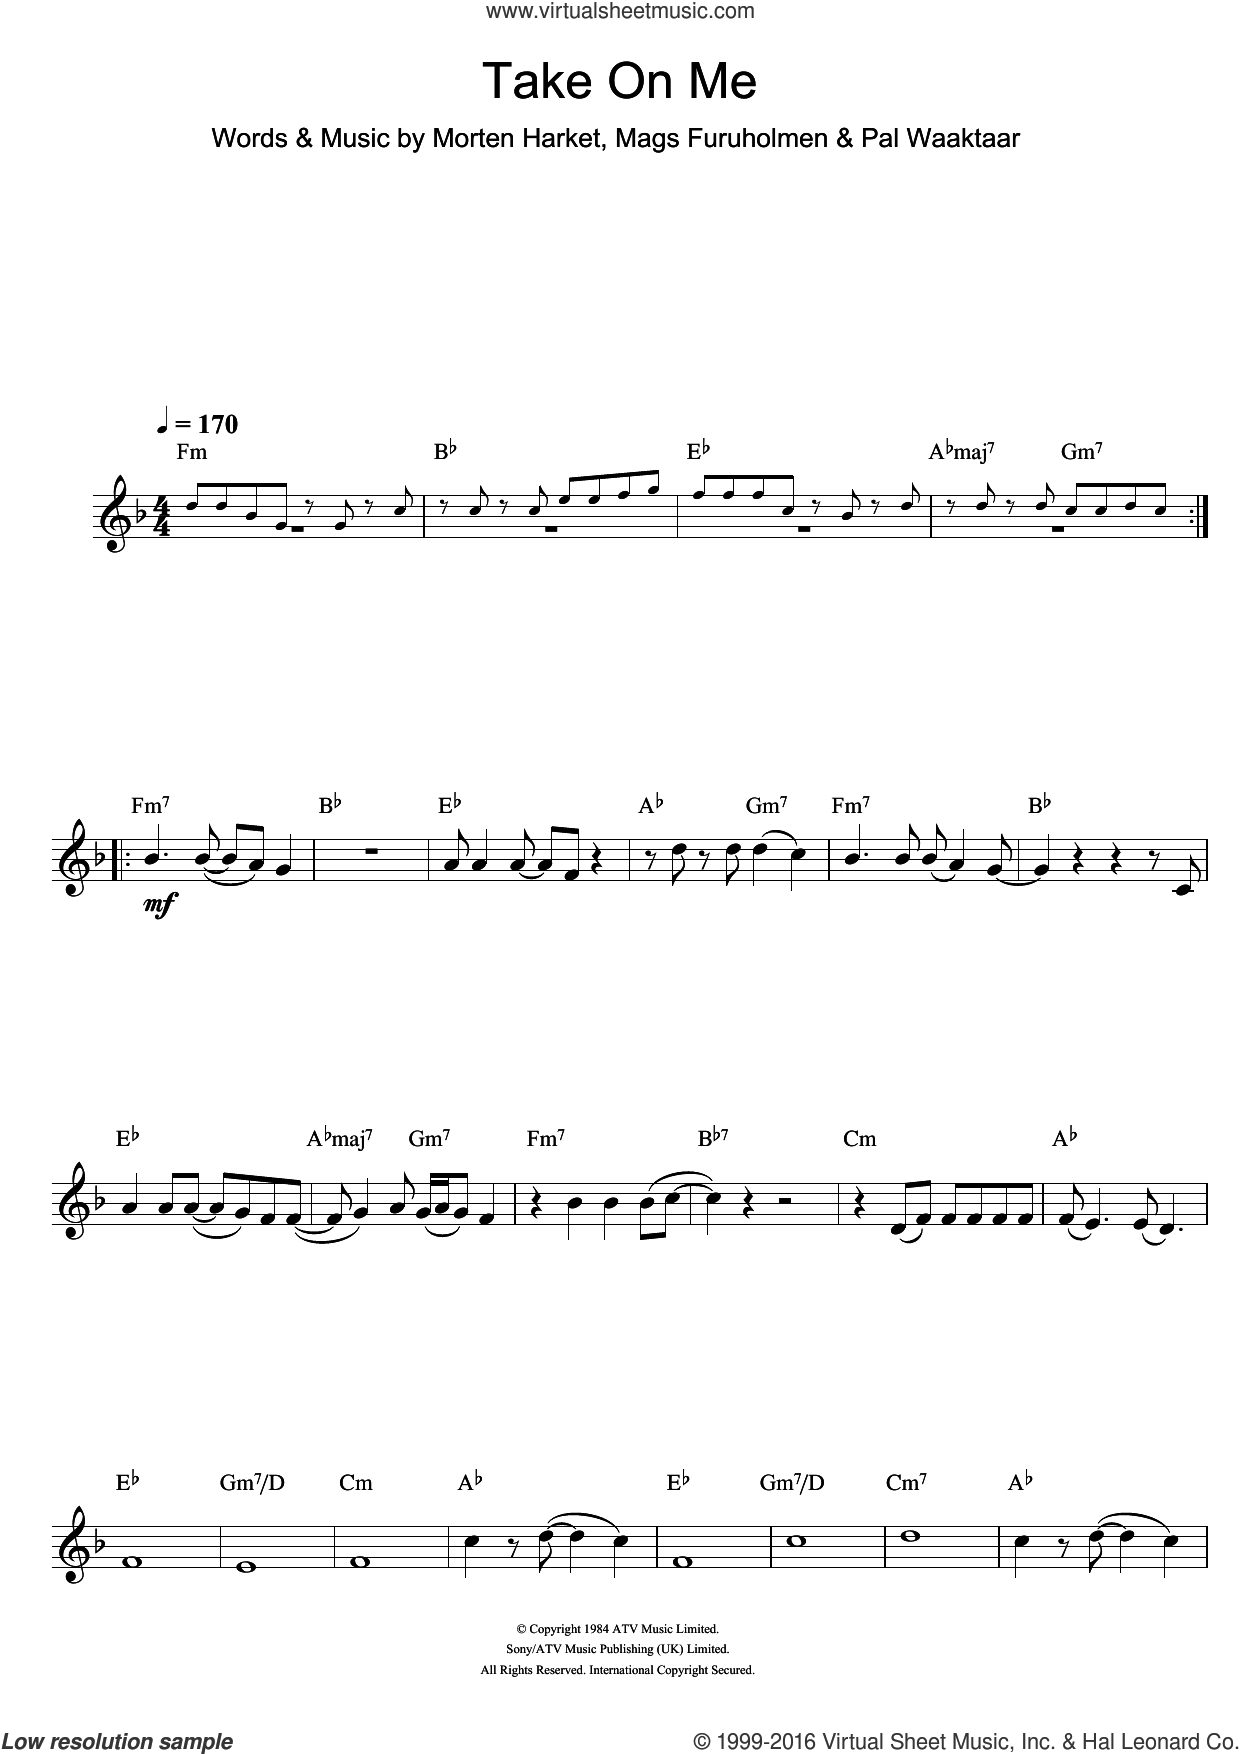 clarinet solo free download